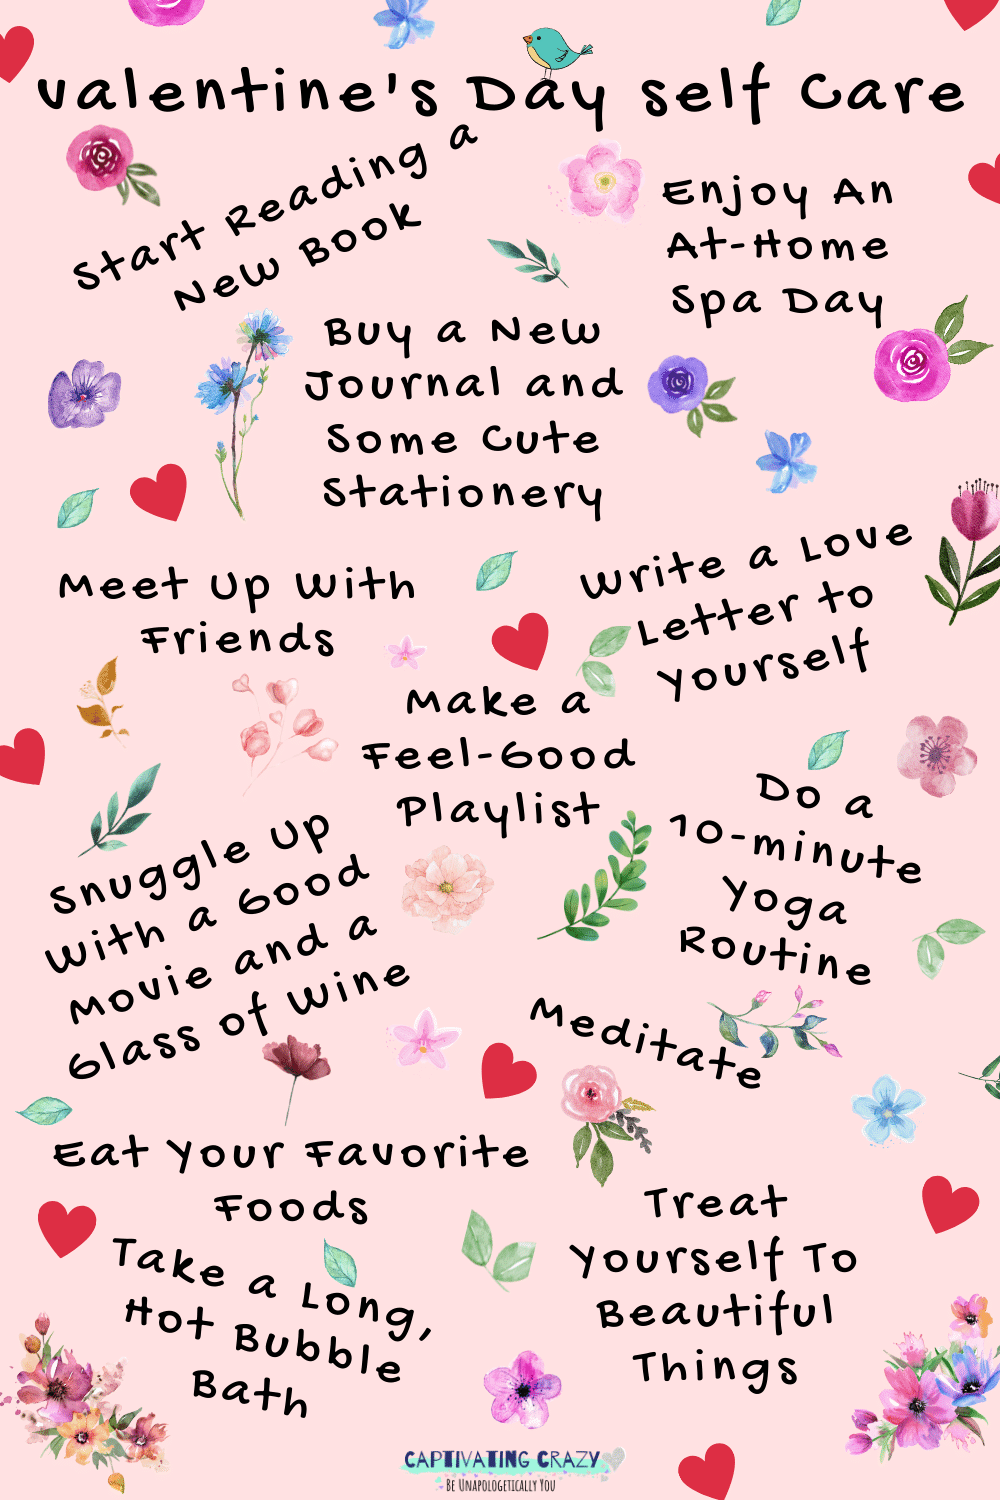 13 Valentine's Day Self Care Ideas For A Day Full Of Love and Relaxation